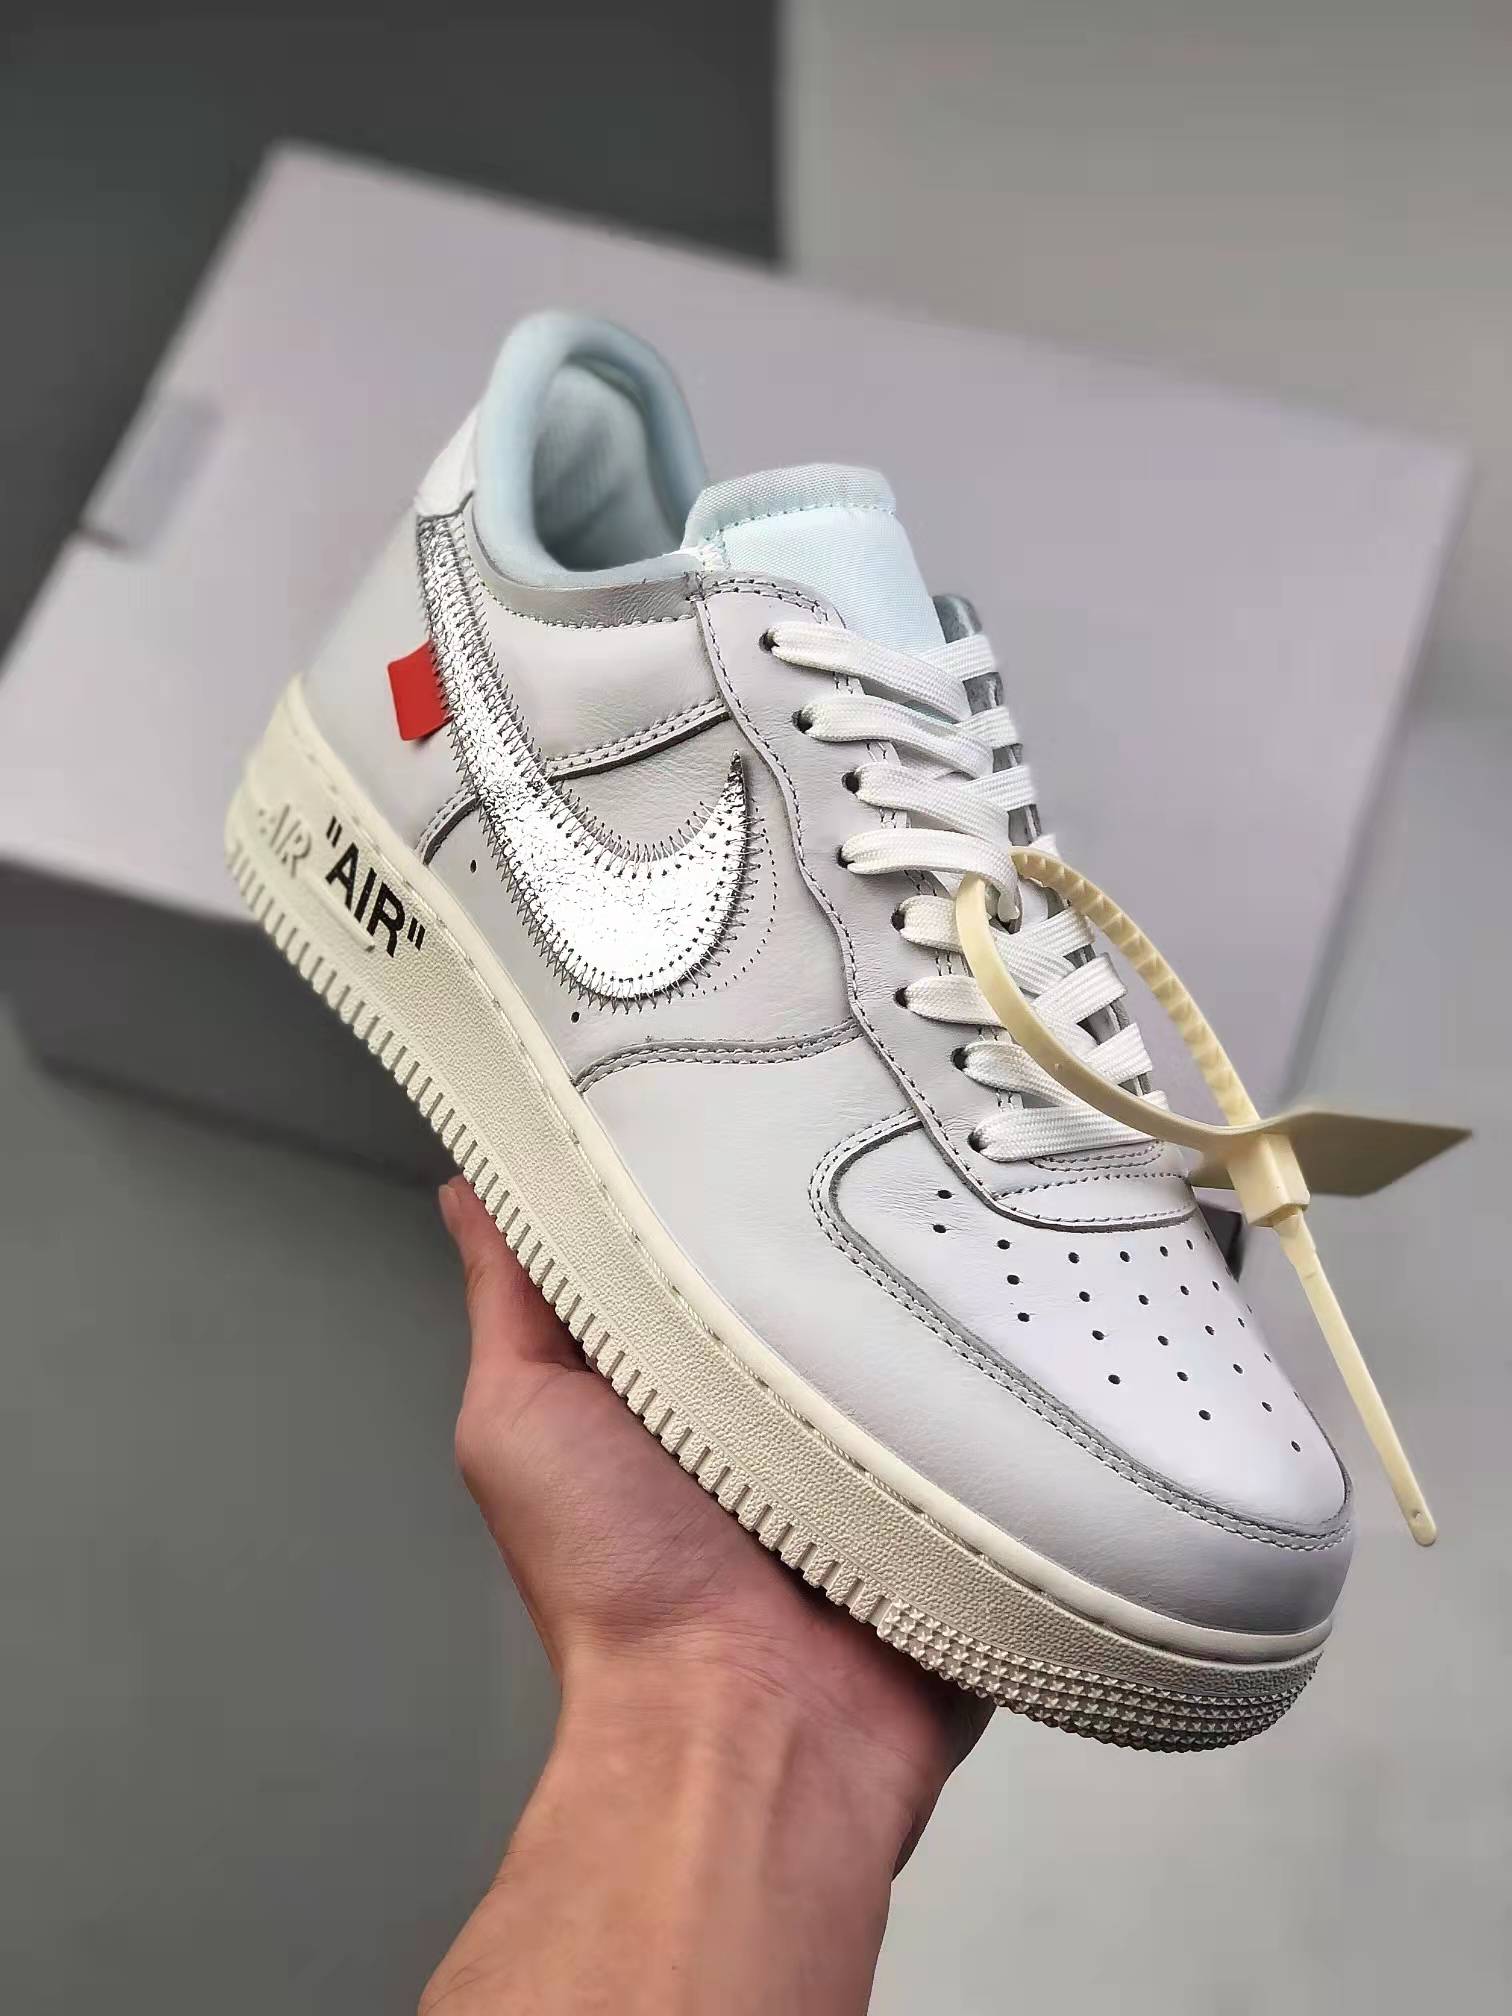 Nike OFF-WHITE x Nike Air Force 1 'ComplexCon Exclusive' AO4297-100 - Limited Edition Collab Sneakers